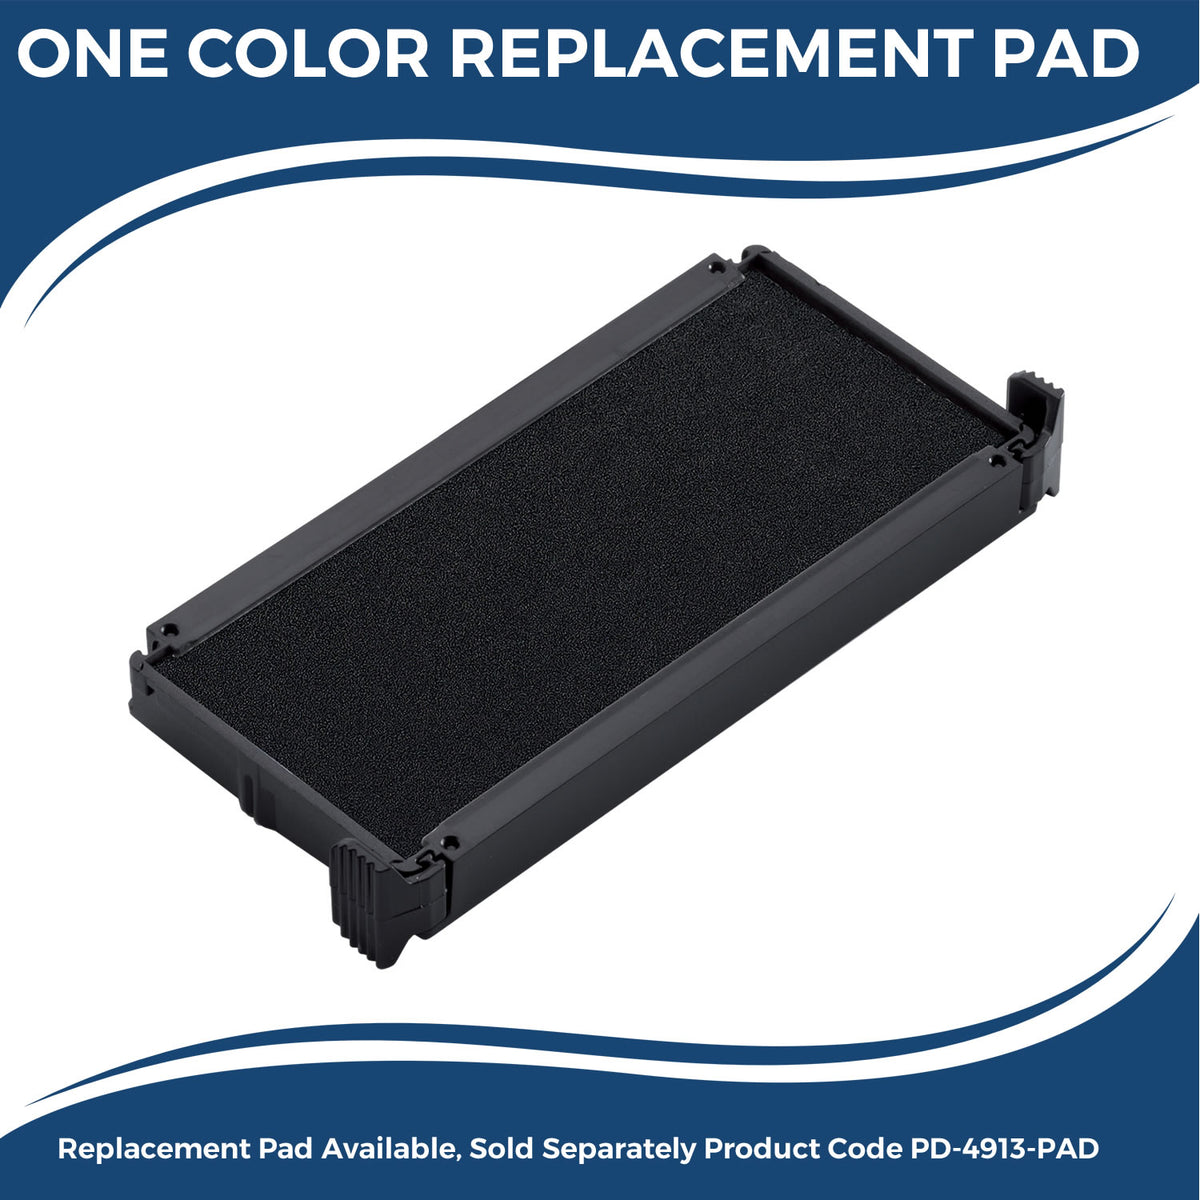 Large Self-Inking Bold Shred Stamp 5588S Large Replacment Pad